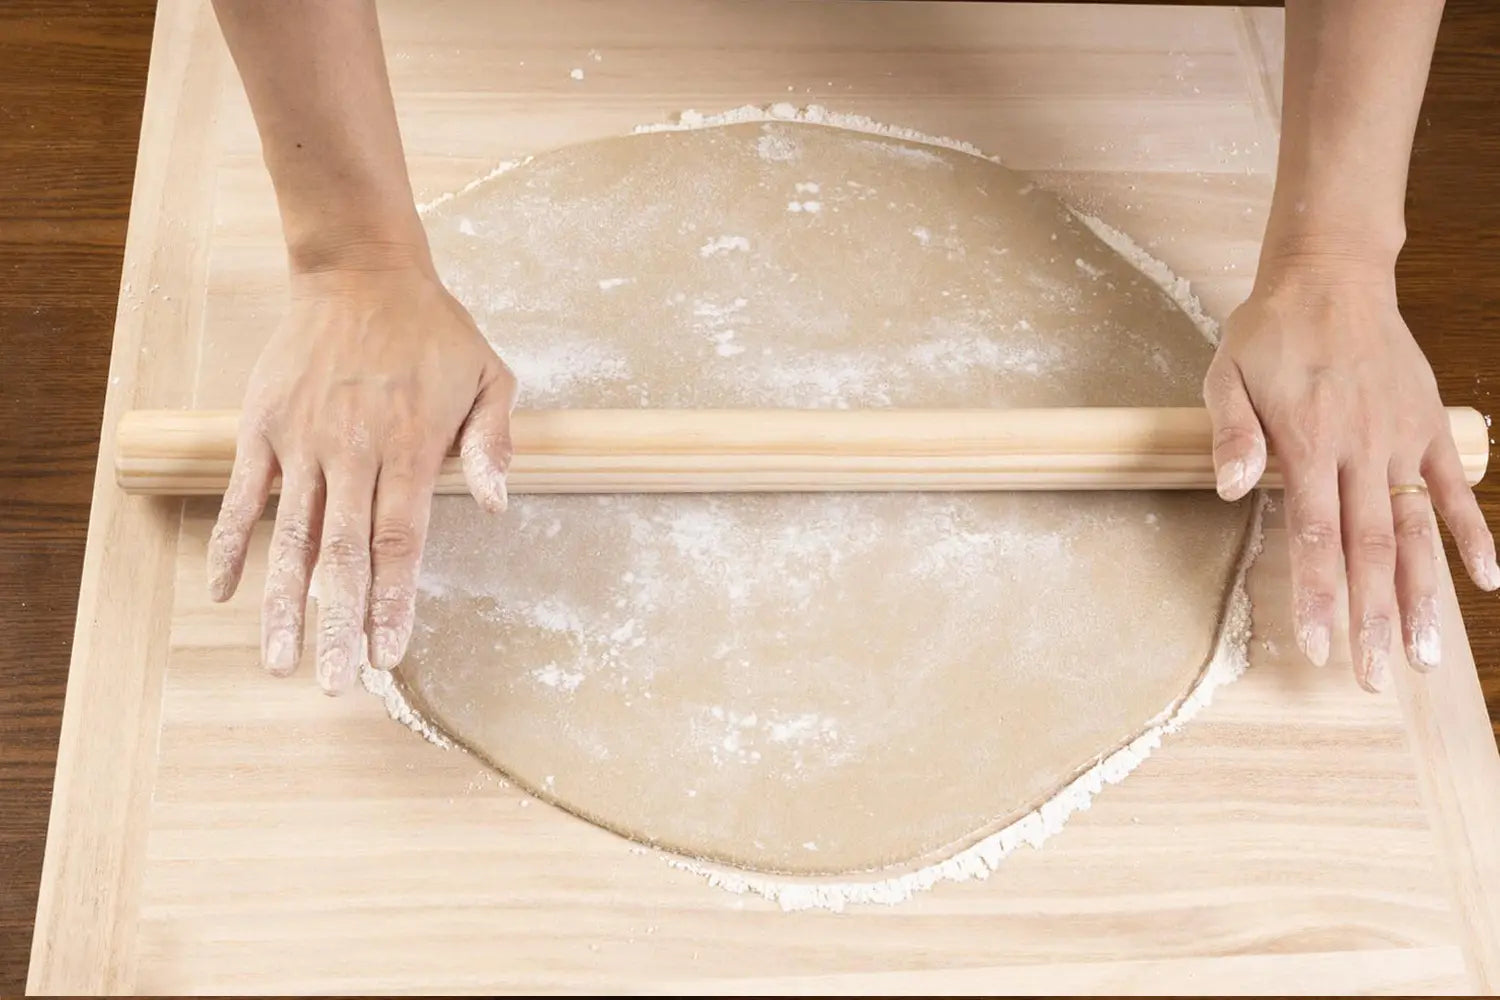 Flattening further with a rolling pin